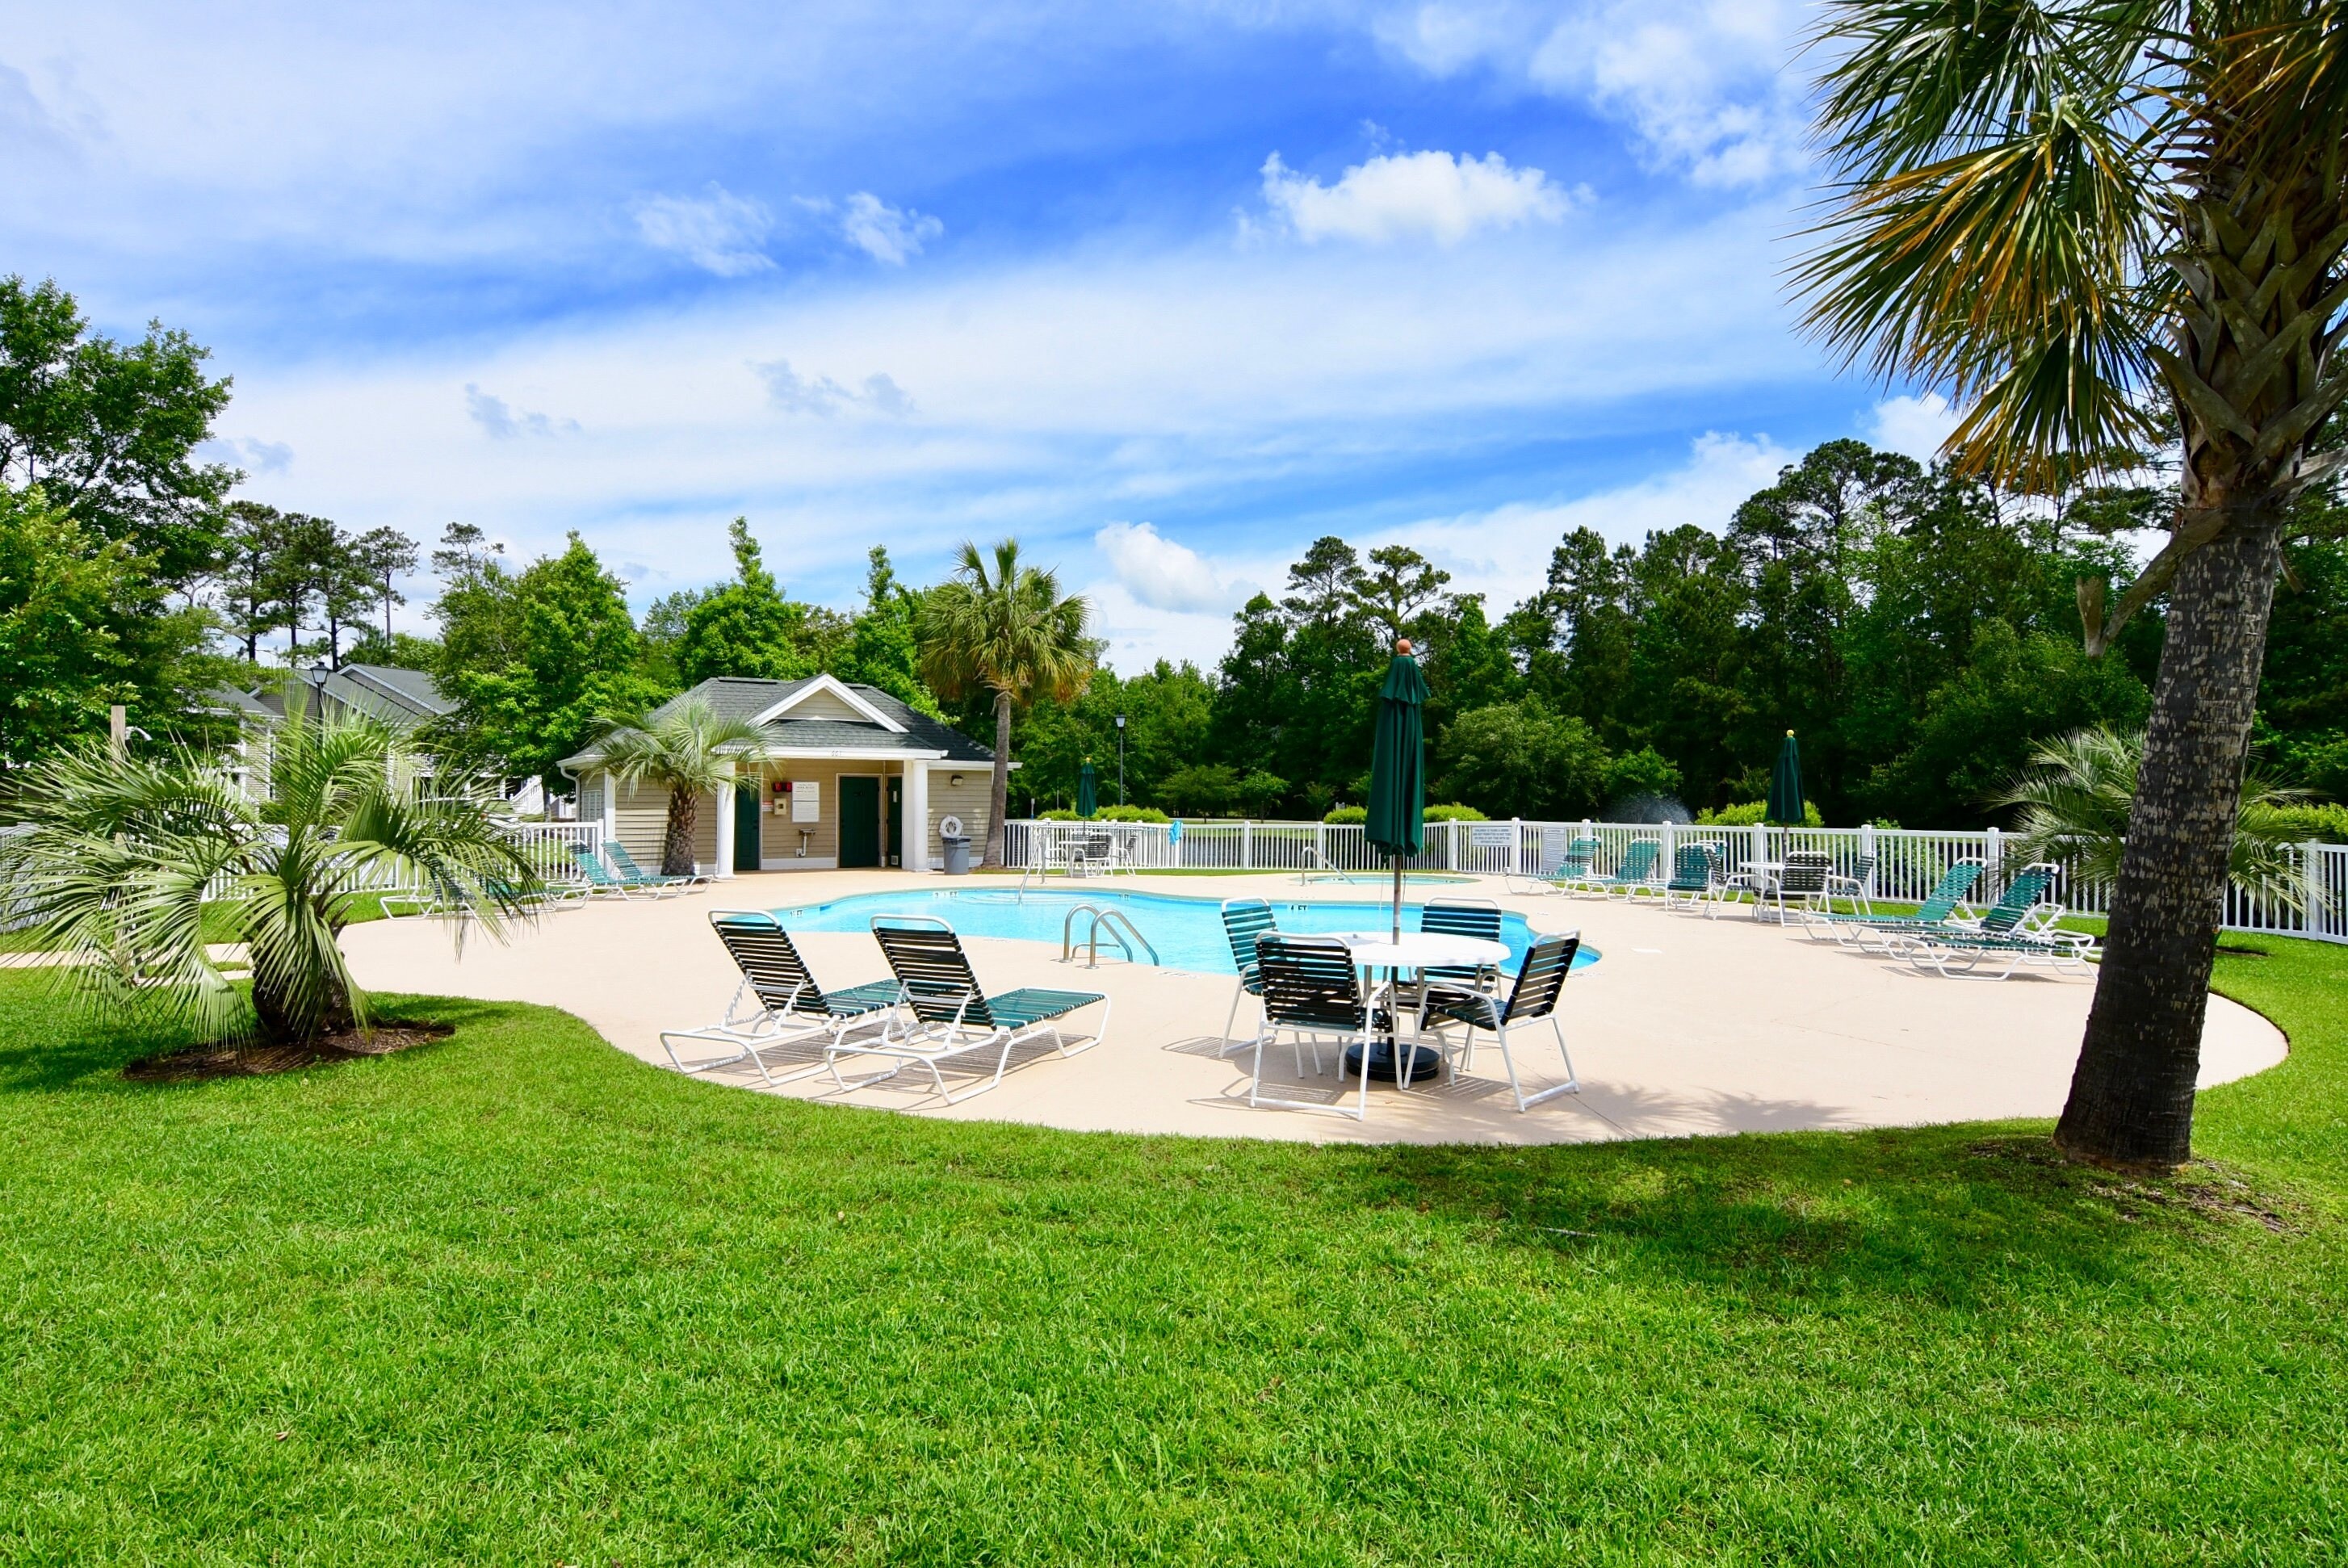 Property Image 2 - Located on the ground level and across from the pool with Pass to Huntington State Park!